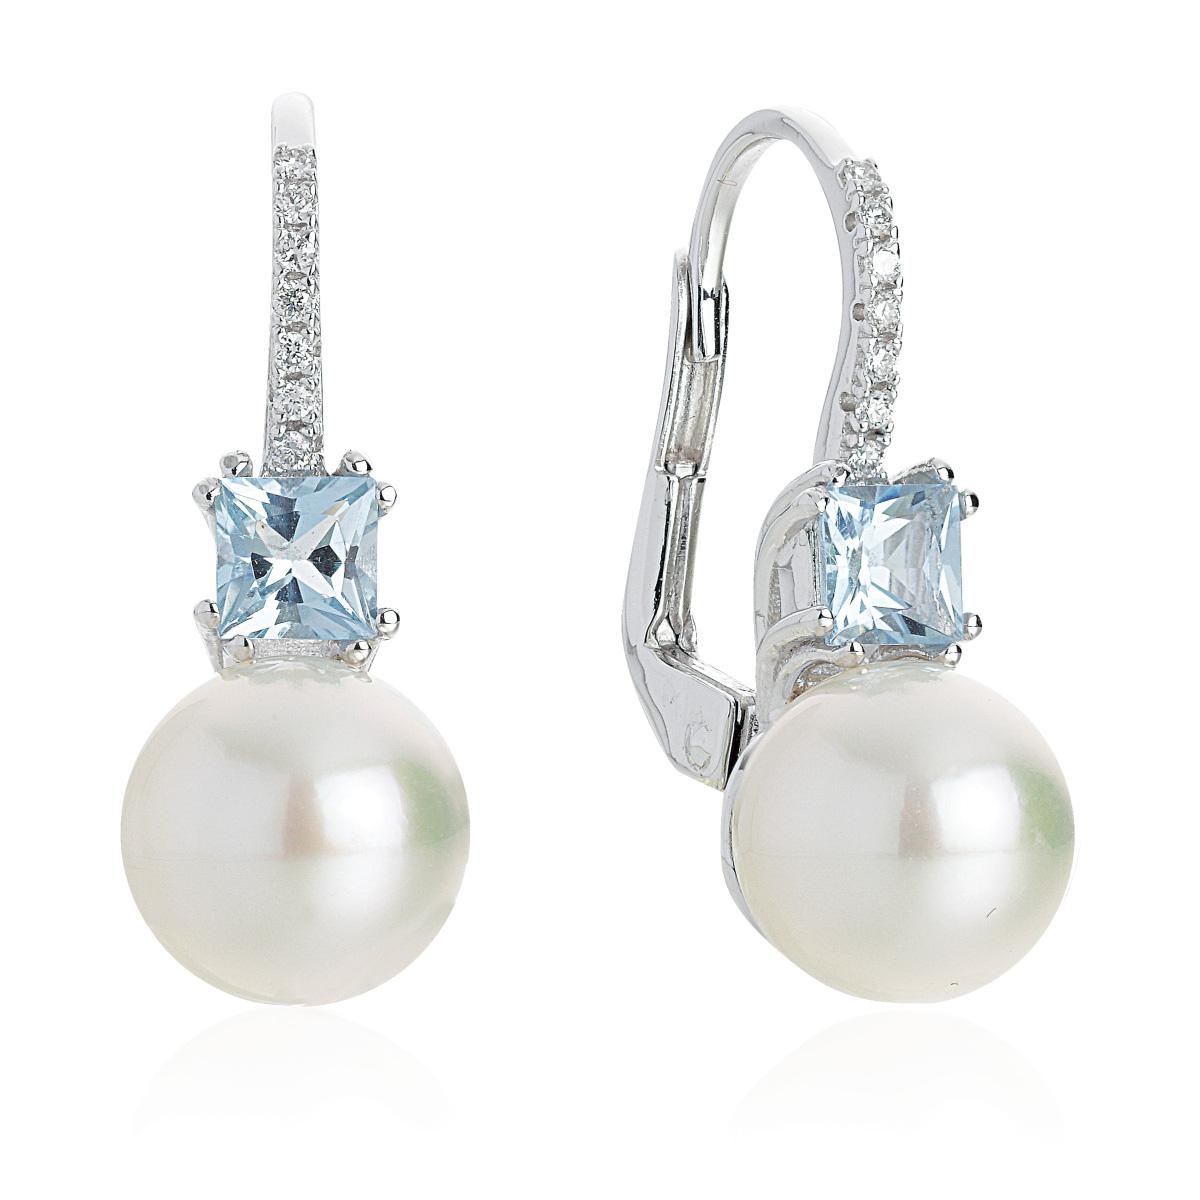 Hook earrings in 18 kt white gold with aquamarines, diamonds and sea pearls 8.50-9 mm - OD392/AC-LB